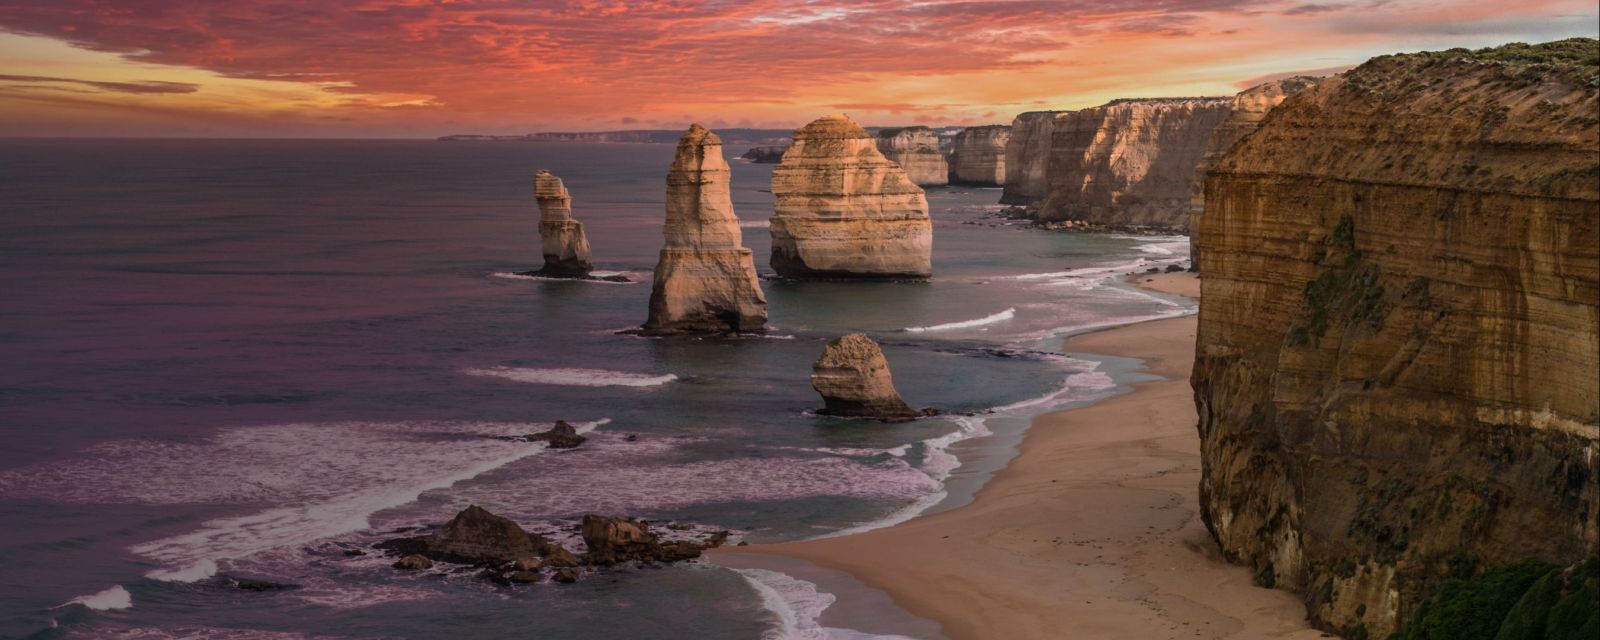 Best Time and Top Spots at the Great Ocean Road - 3 Days Itinerary